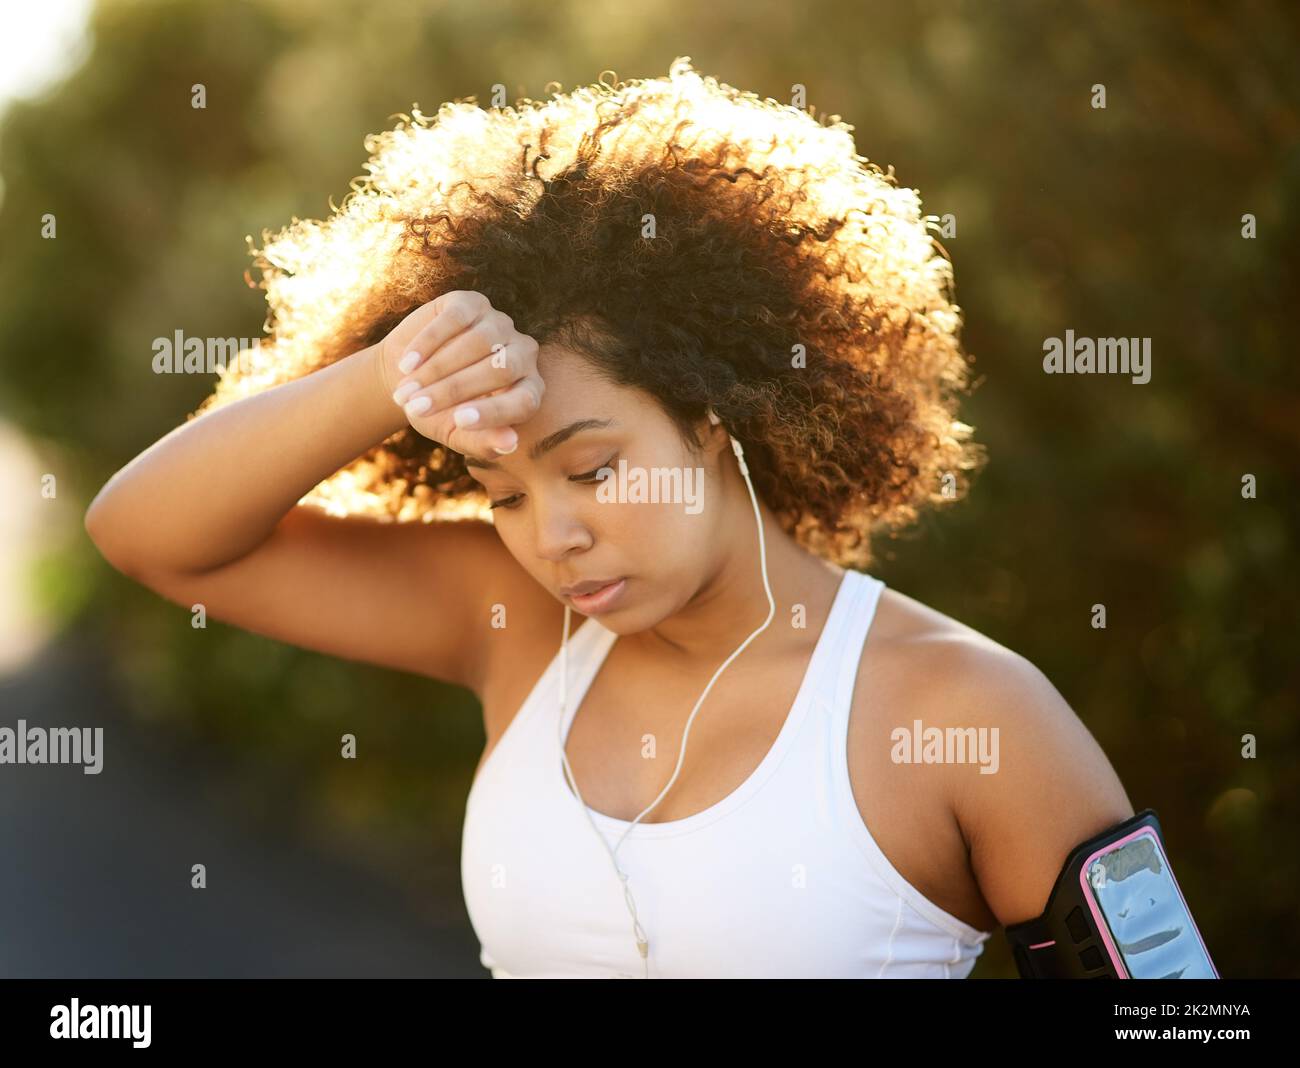 Working up a sweat. Shot of an attractive young woman wiping her brow during her workout. Stock Photo